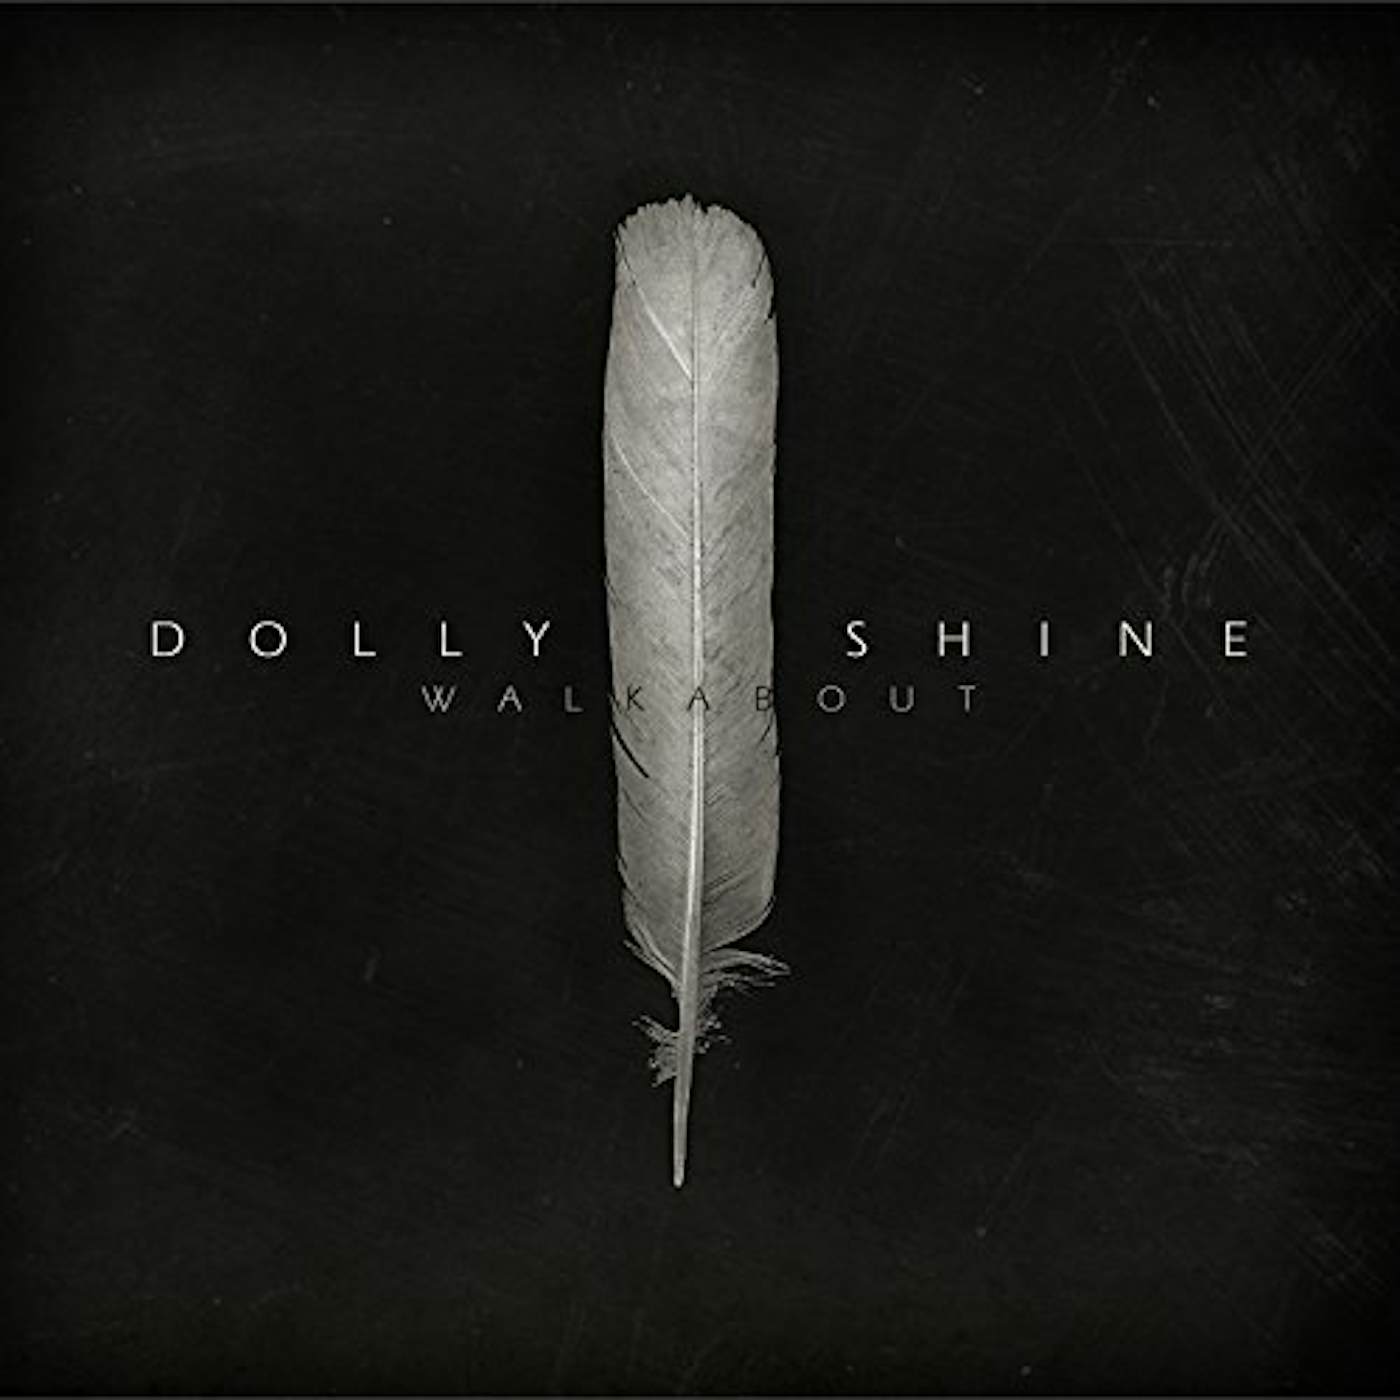 Dolly Shine WALKABOUT CD